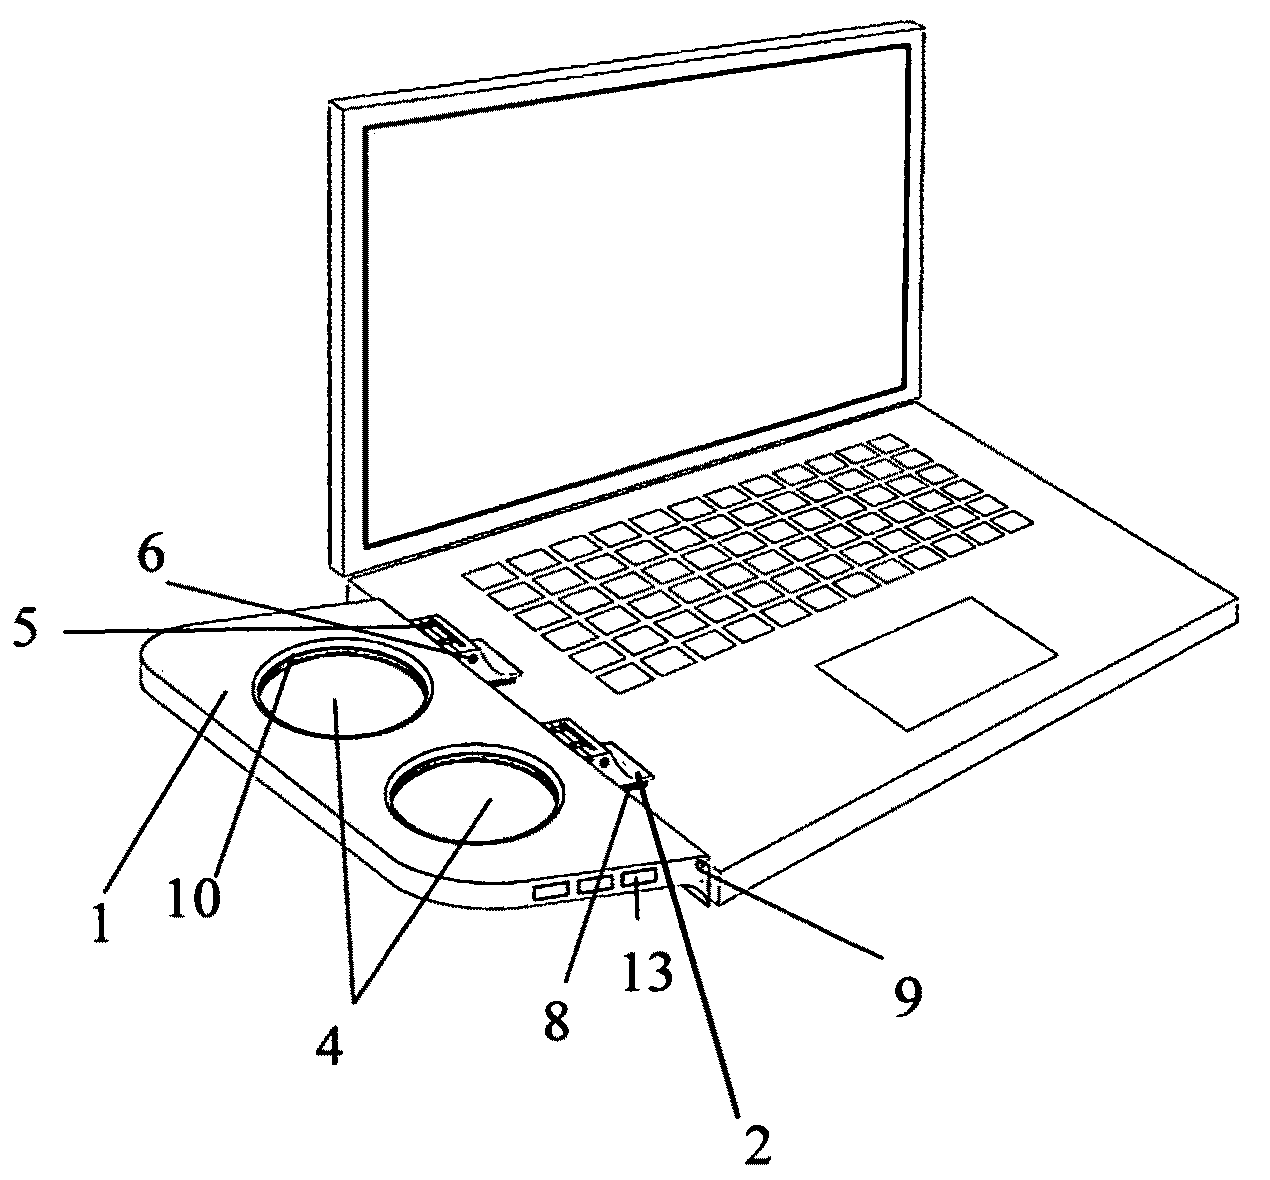 Multifunction portable table attachment for laptop computers